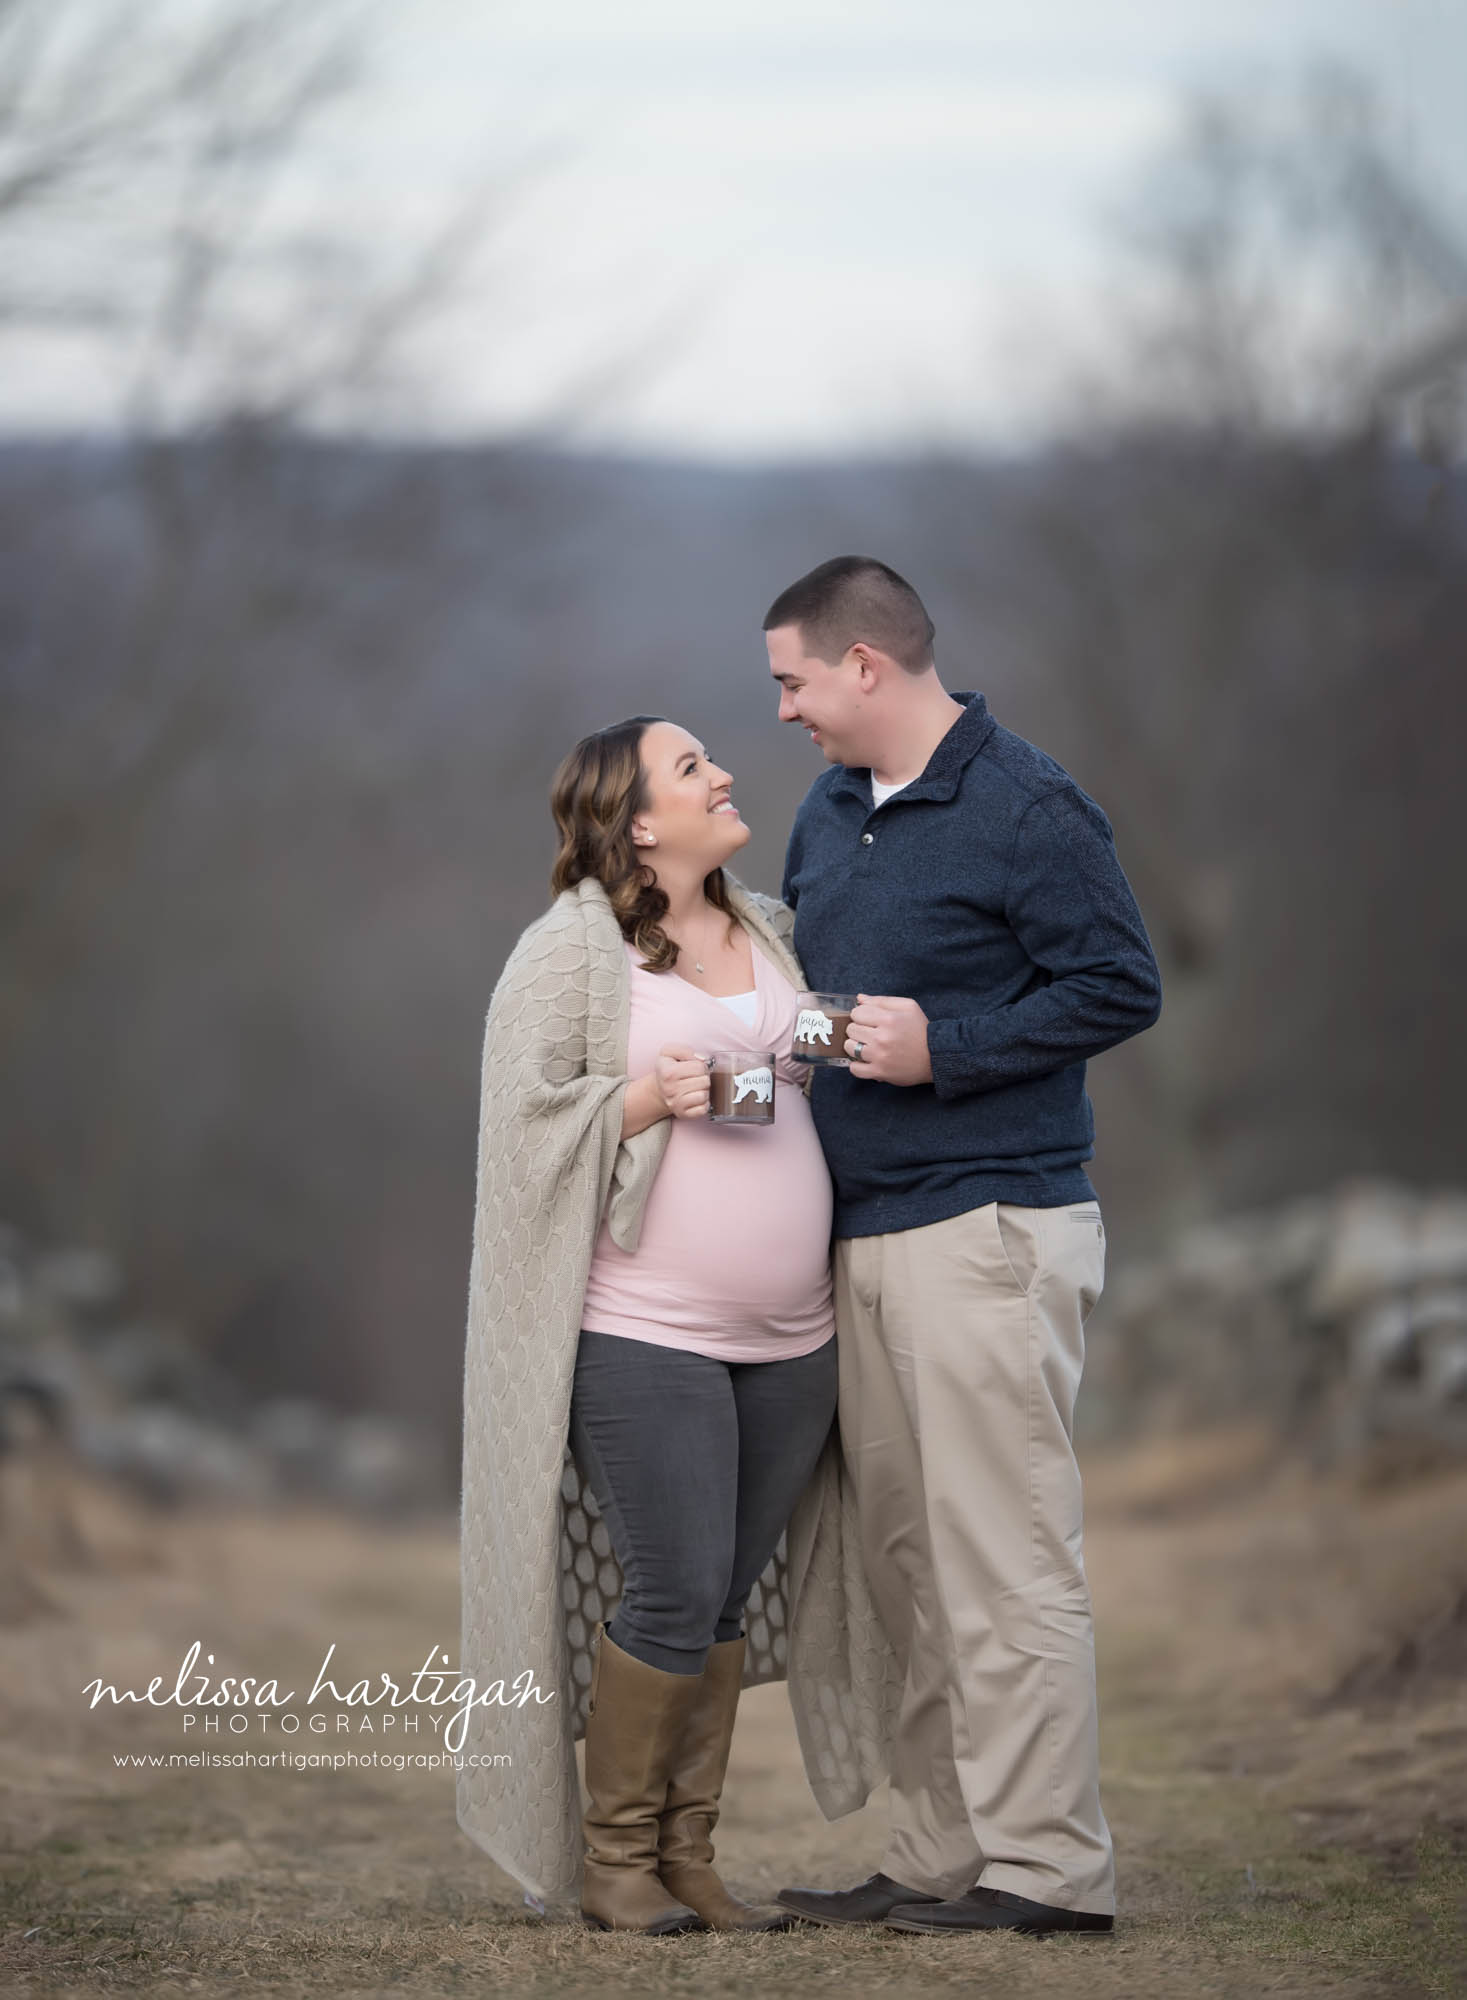 Expectant couple standing looking at eachother connected maternity pose holding mugs with hot chocolate winter maternity pictures with no snow CT maternity newborn photography session